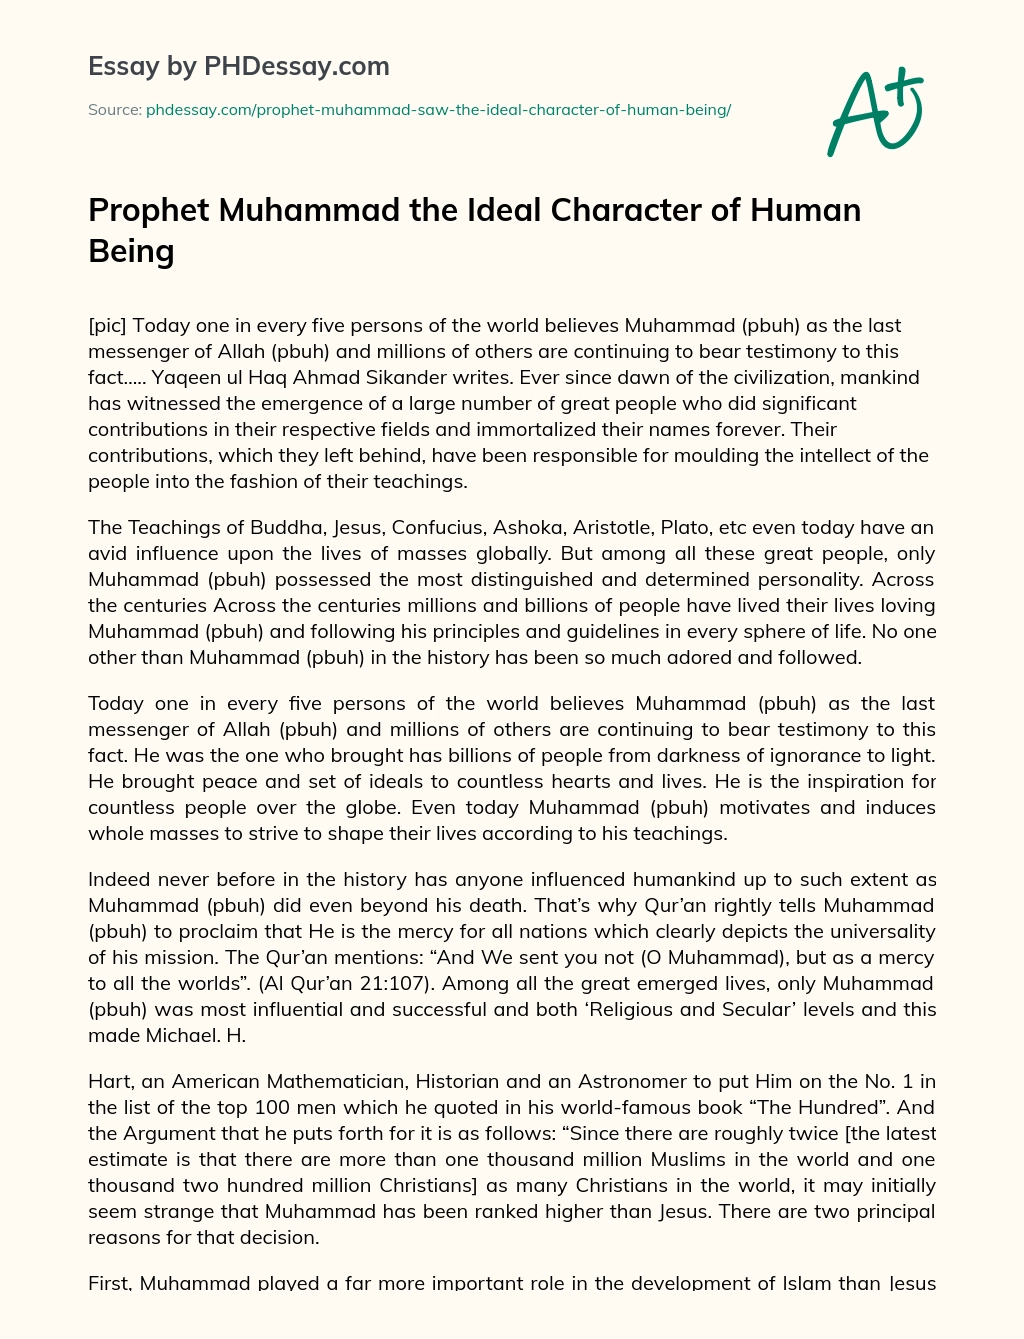 Prophet Muhammad the Ideal Character of Human Being essay